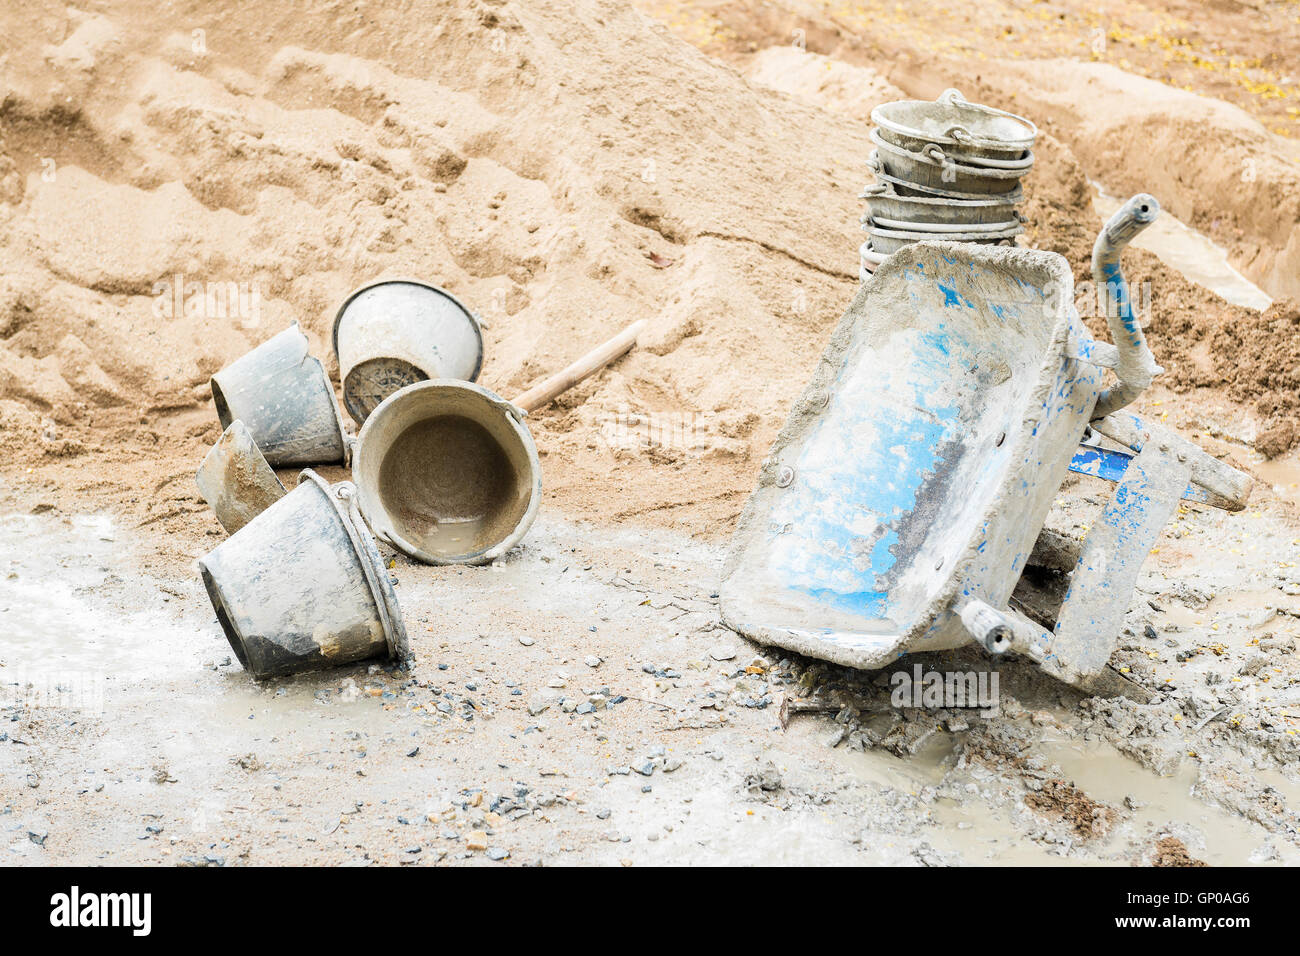 Blue sand barrow park lie on one side, bucket and sand pile beside at a construction site. Stock Photo